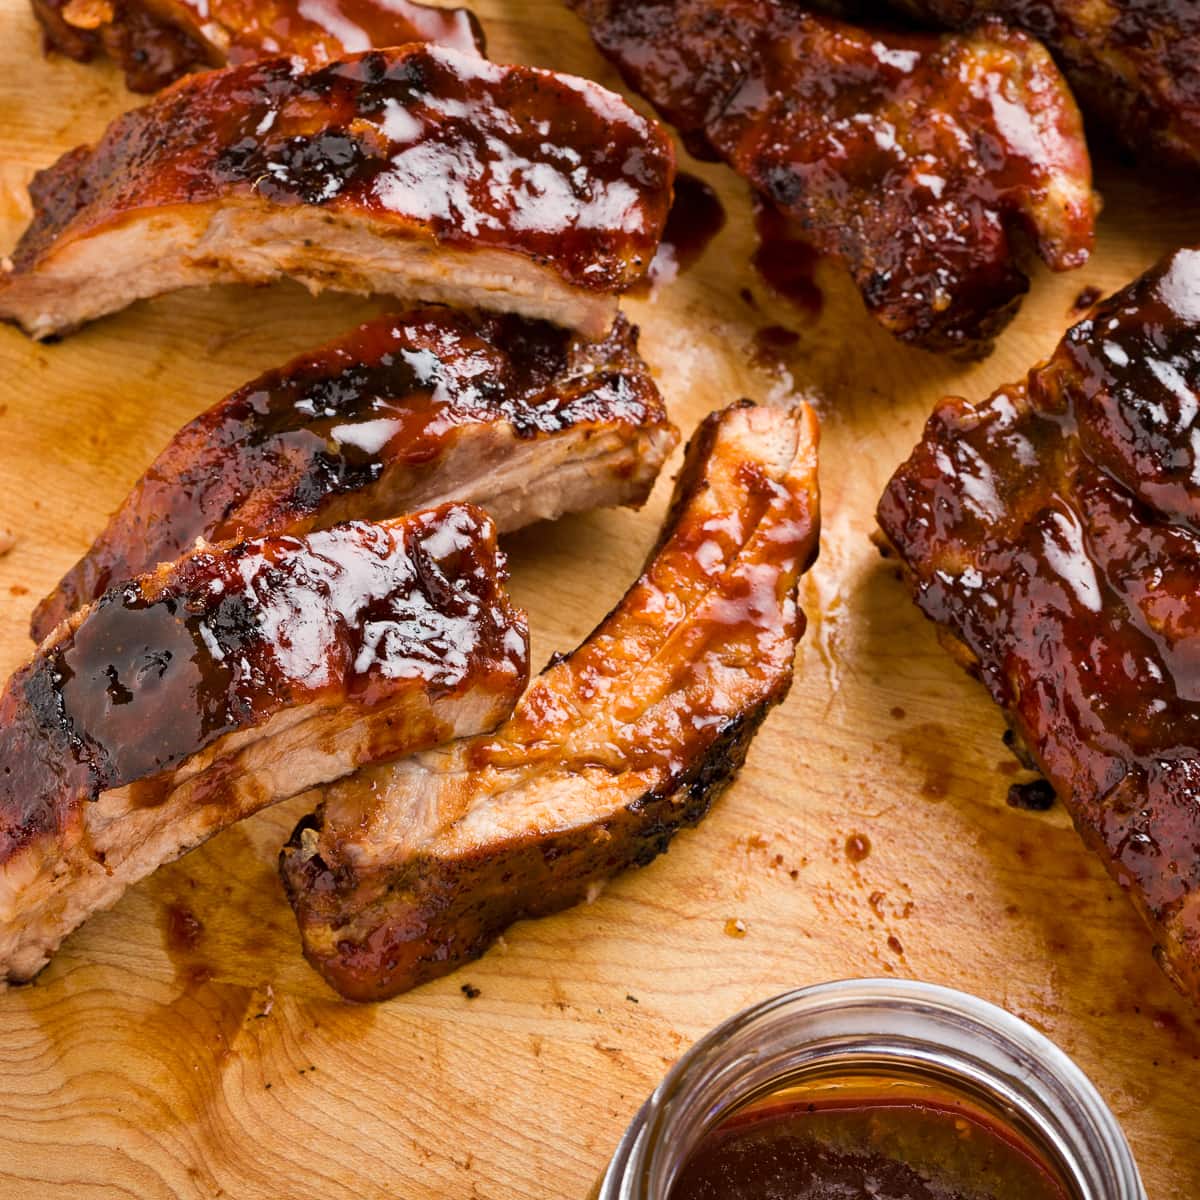 Oven baby back ribs glazed with rich brown hoisin sauce in a cutting board.